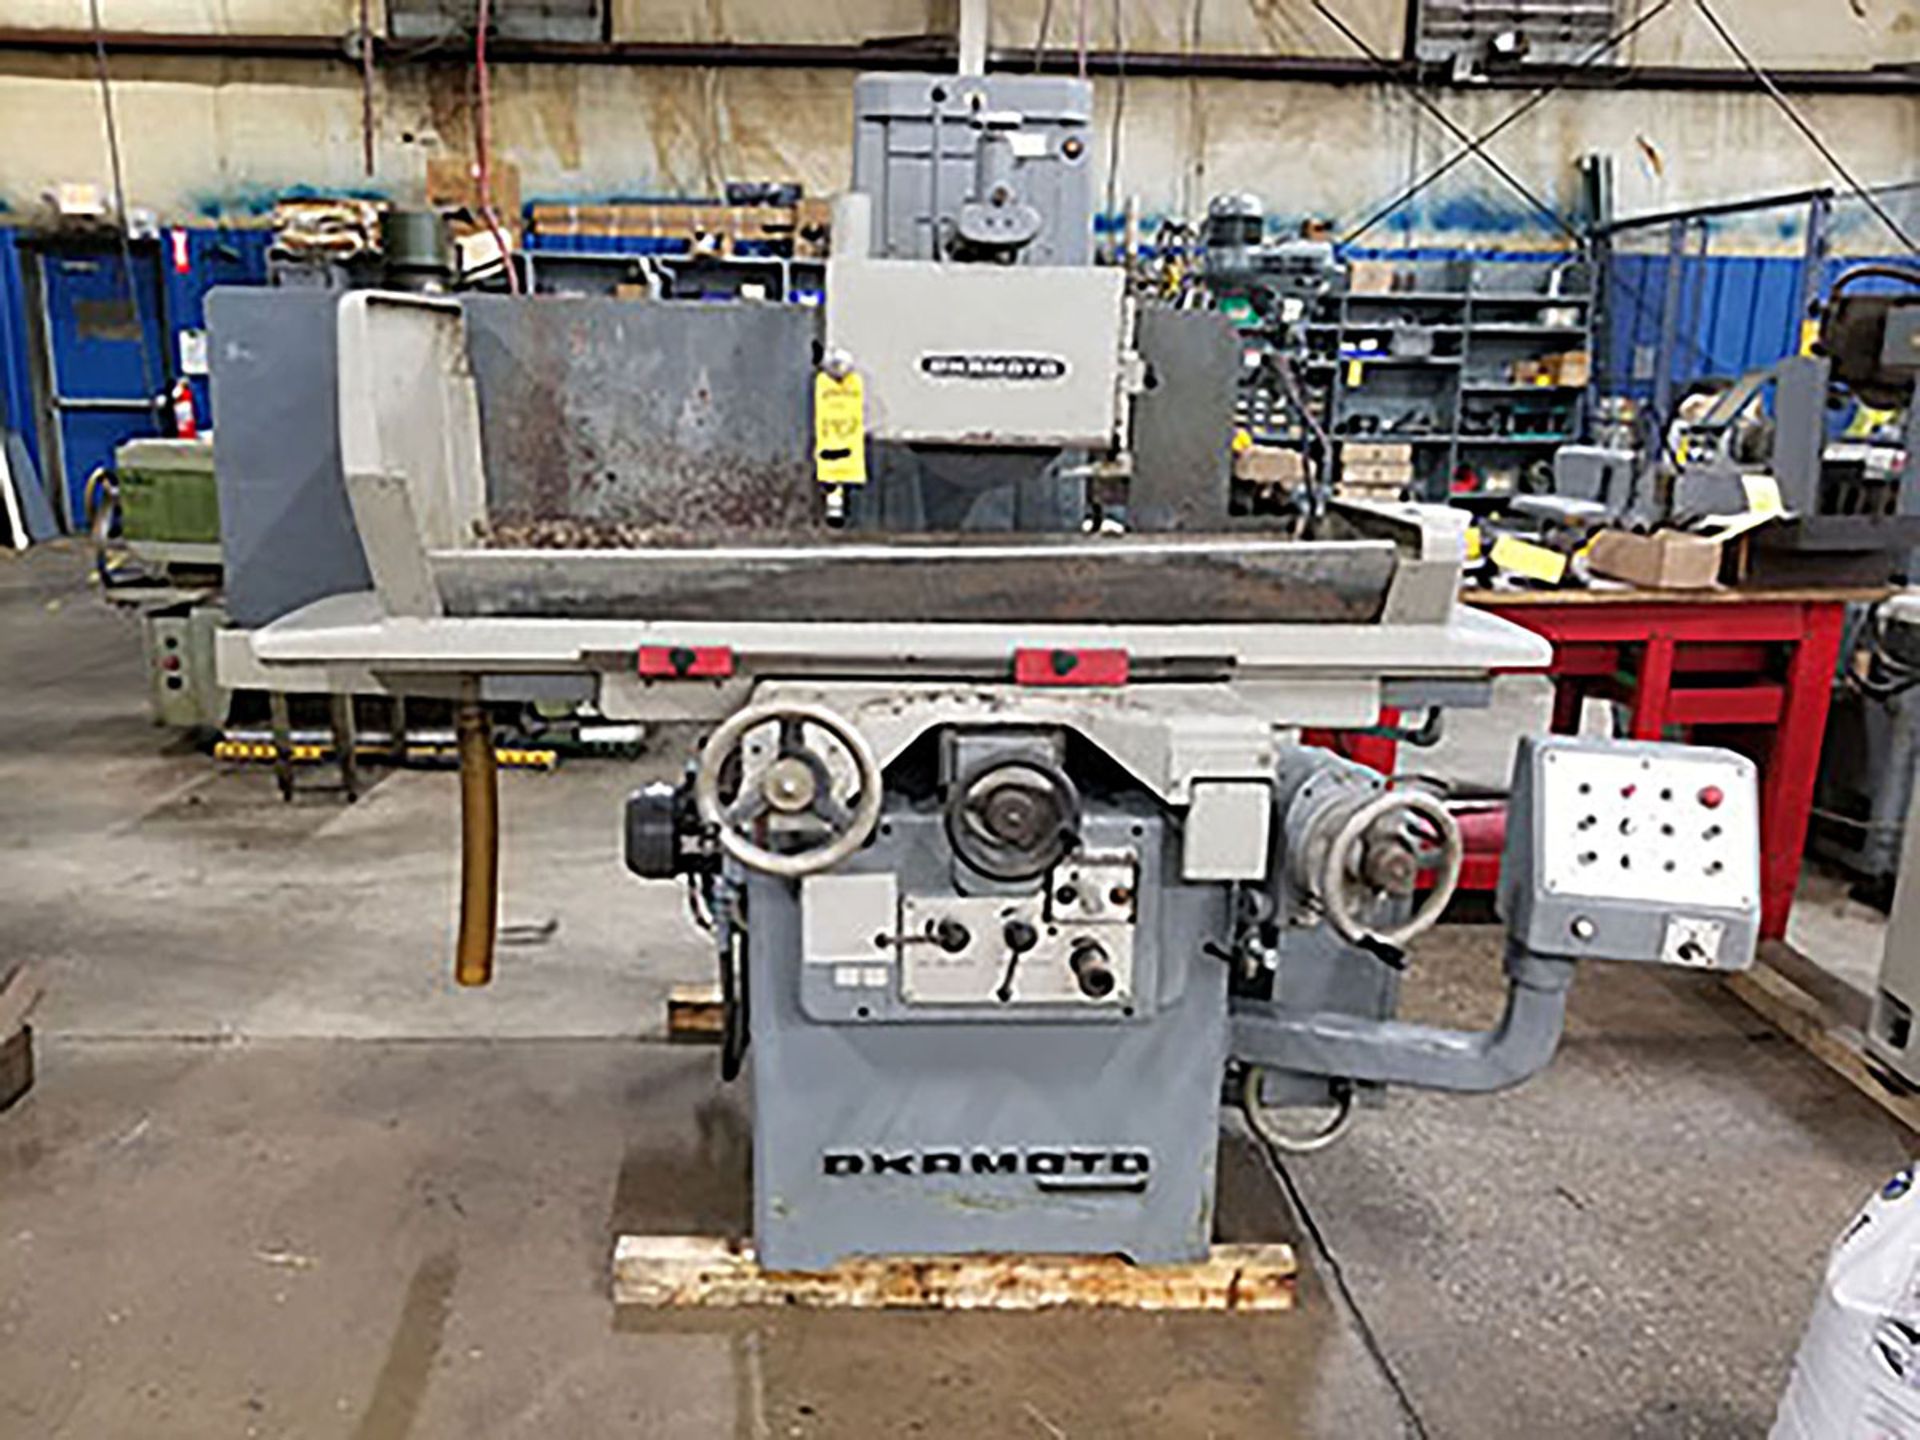 OKAMOTO ACCUGAR 124 SURFACE GRINDER; MAGNETIC CHUCK, S/N 2118 - Image 2 of 5